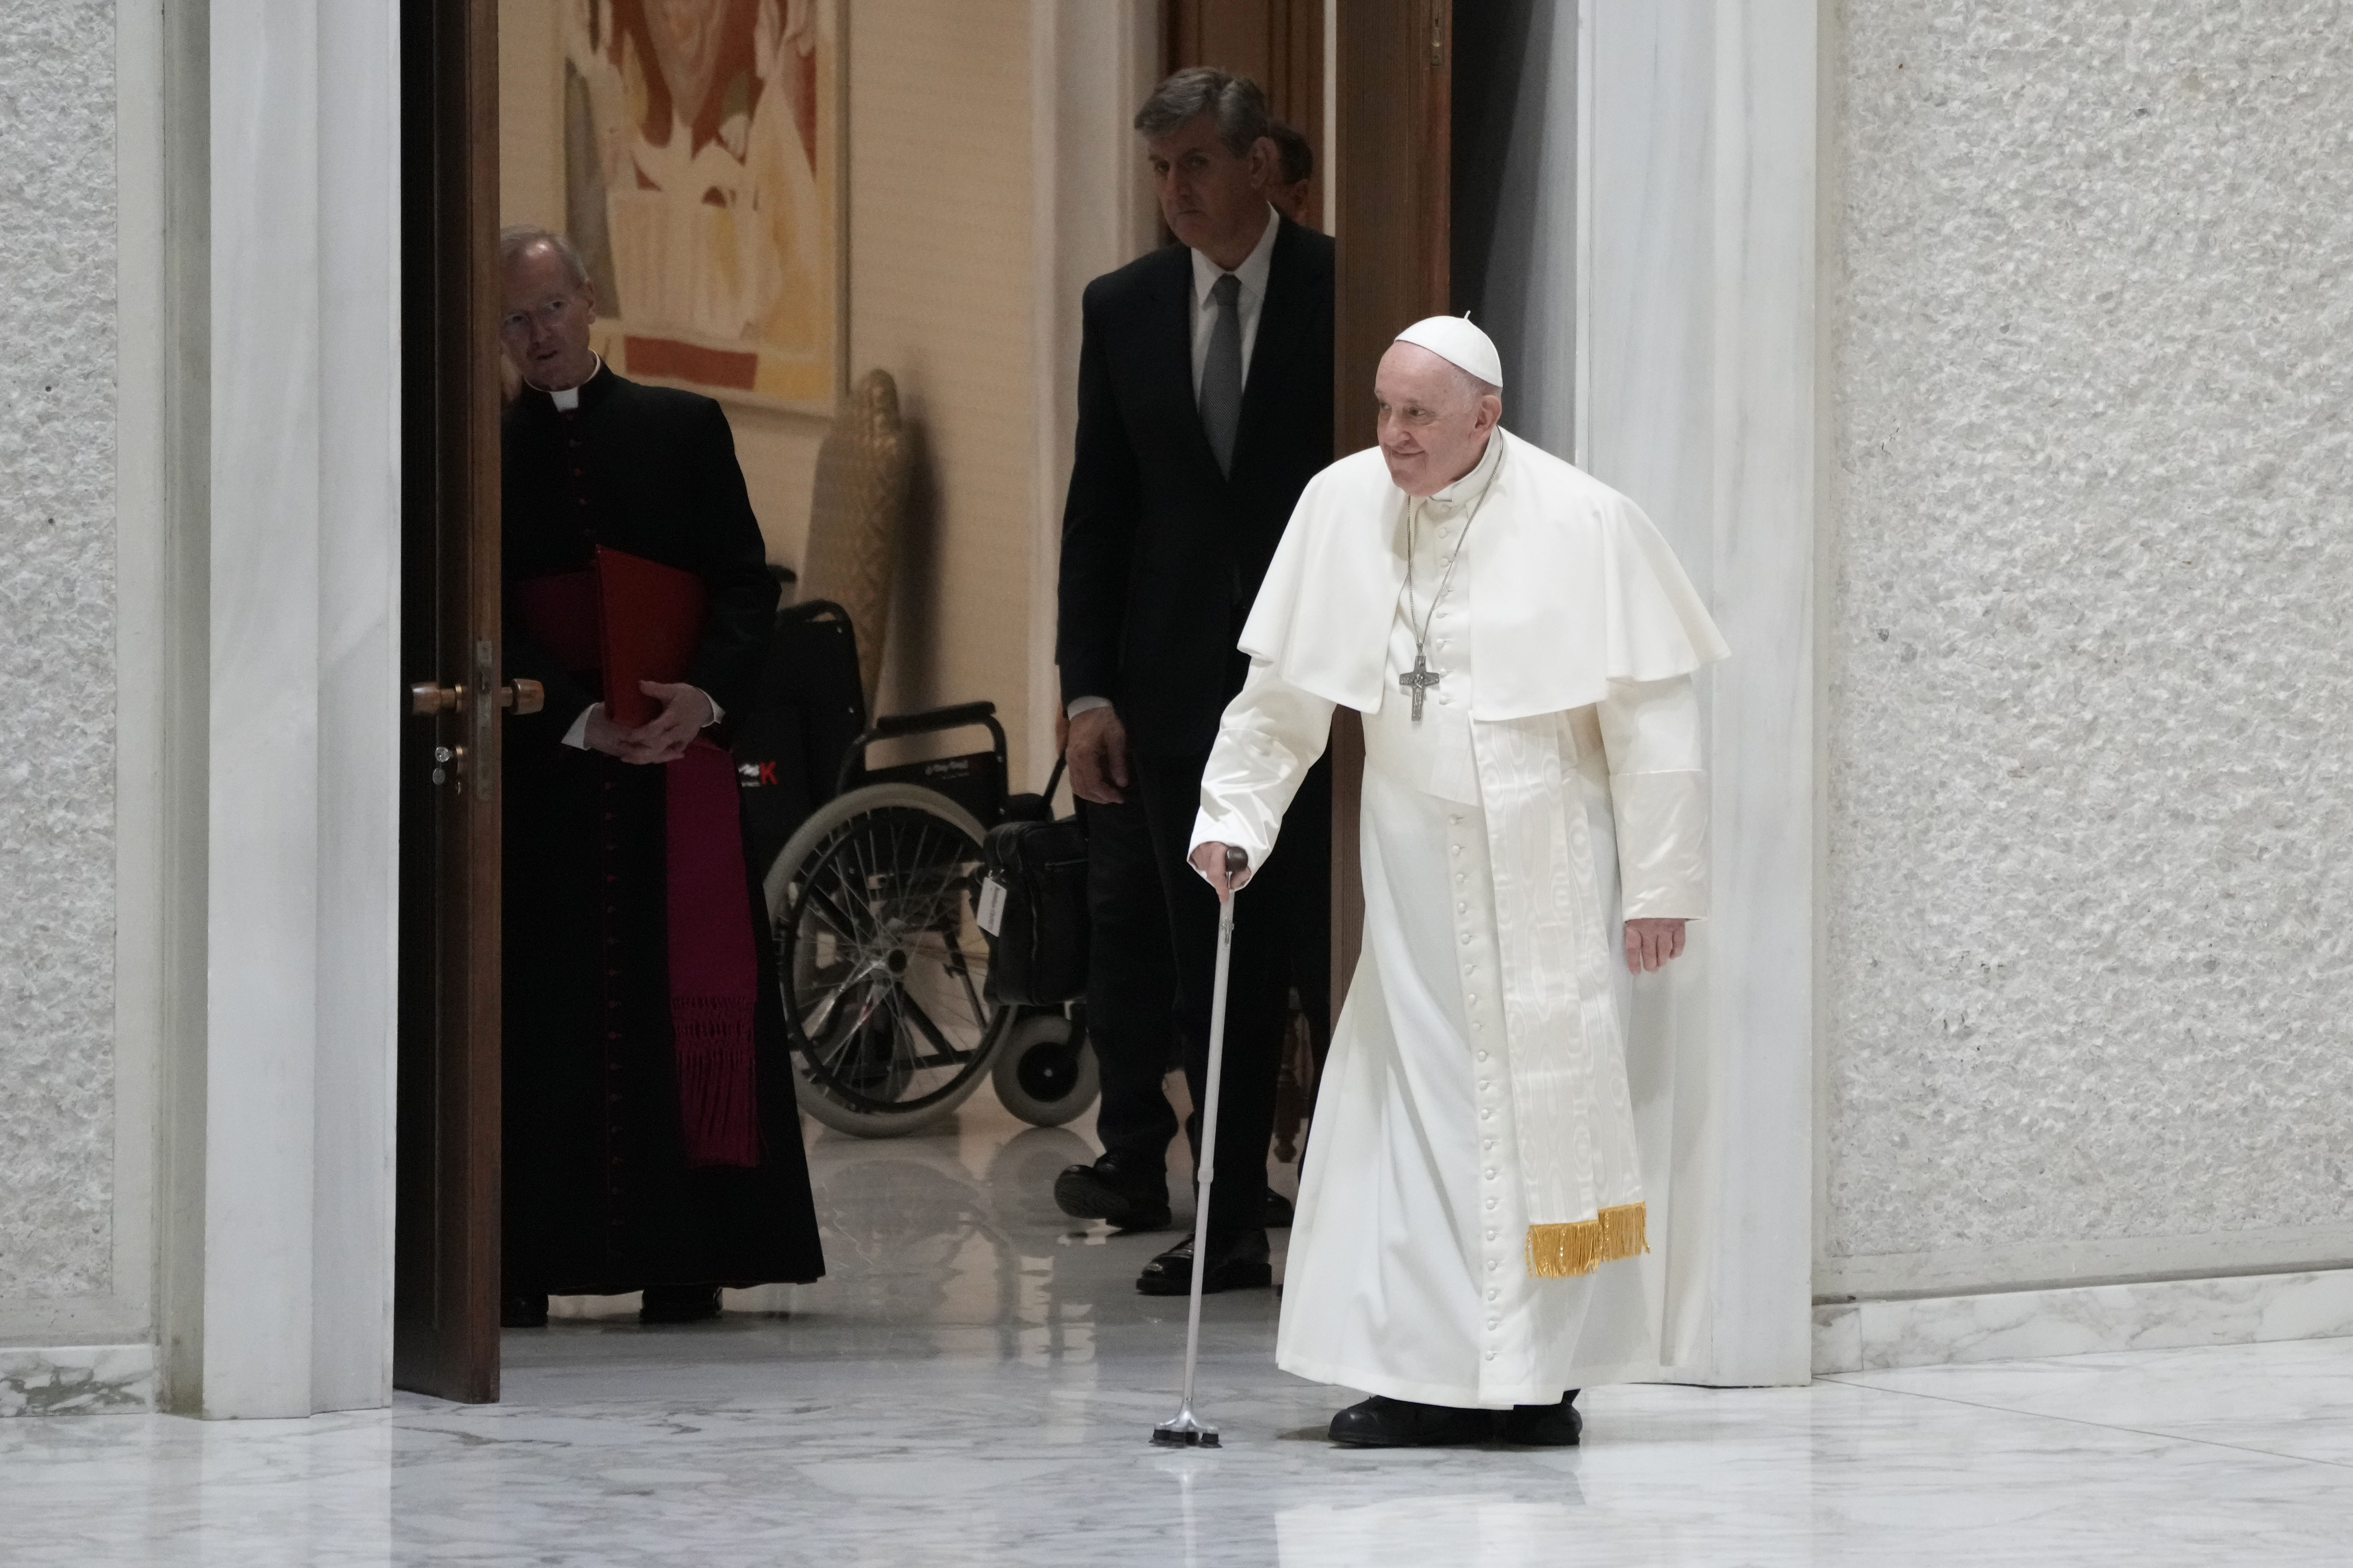 Pope Francis arrives for an audience with pilgrims from the Rho diocese in the Paul VI Hall, Vatican, Saturday, March 25, 2023. (AP Photo/Alessandra Tarantino)